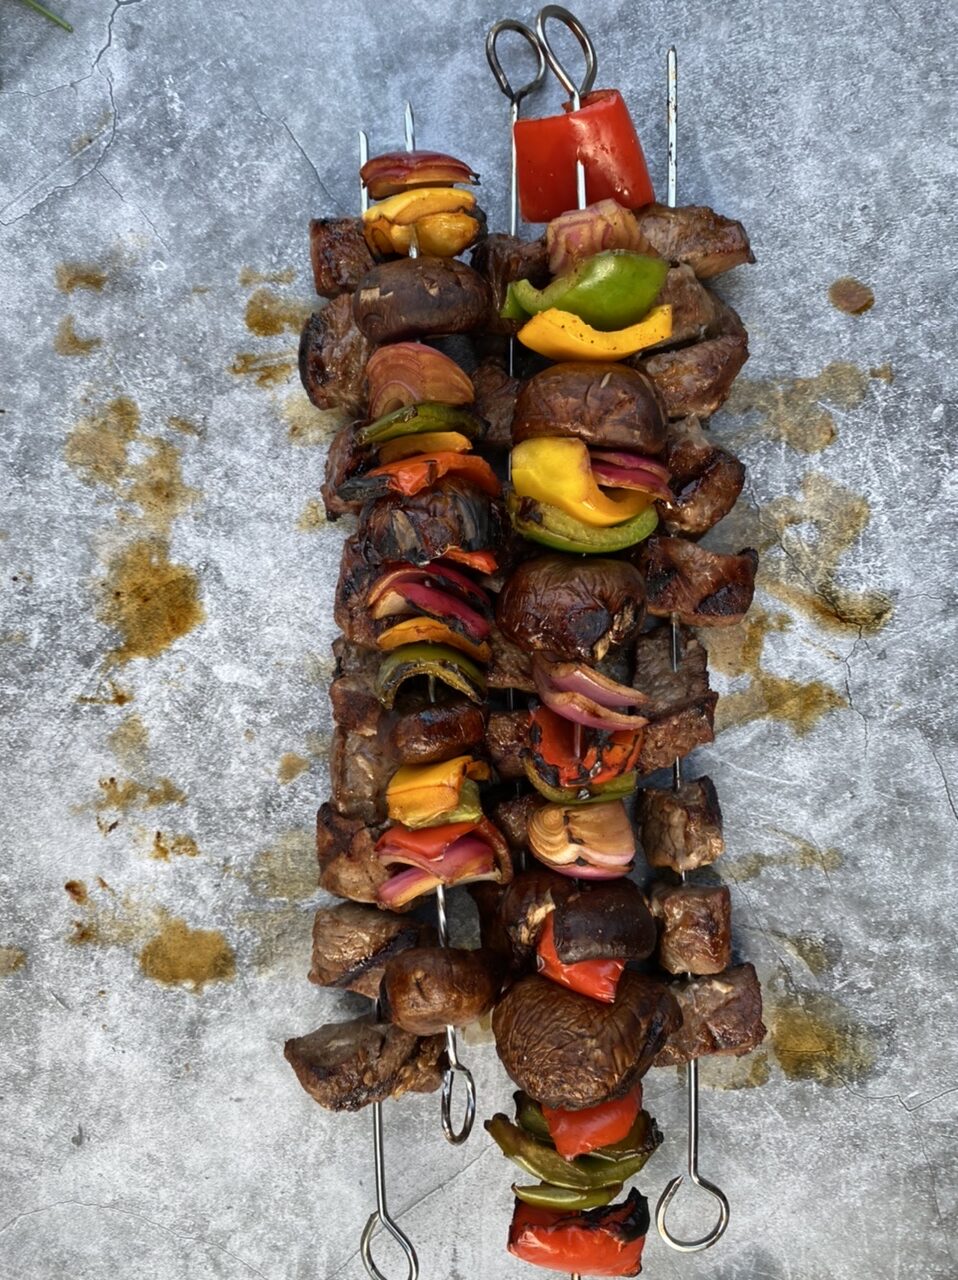 44EADC9C 19FE 43AD A0C0 83CC1F68B36B e1598570419822 - Amazing Vitamin Packed Steakhouse Shish Kebabs with Charred Vegetables